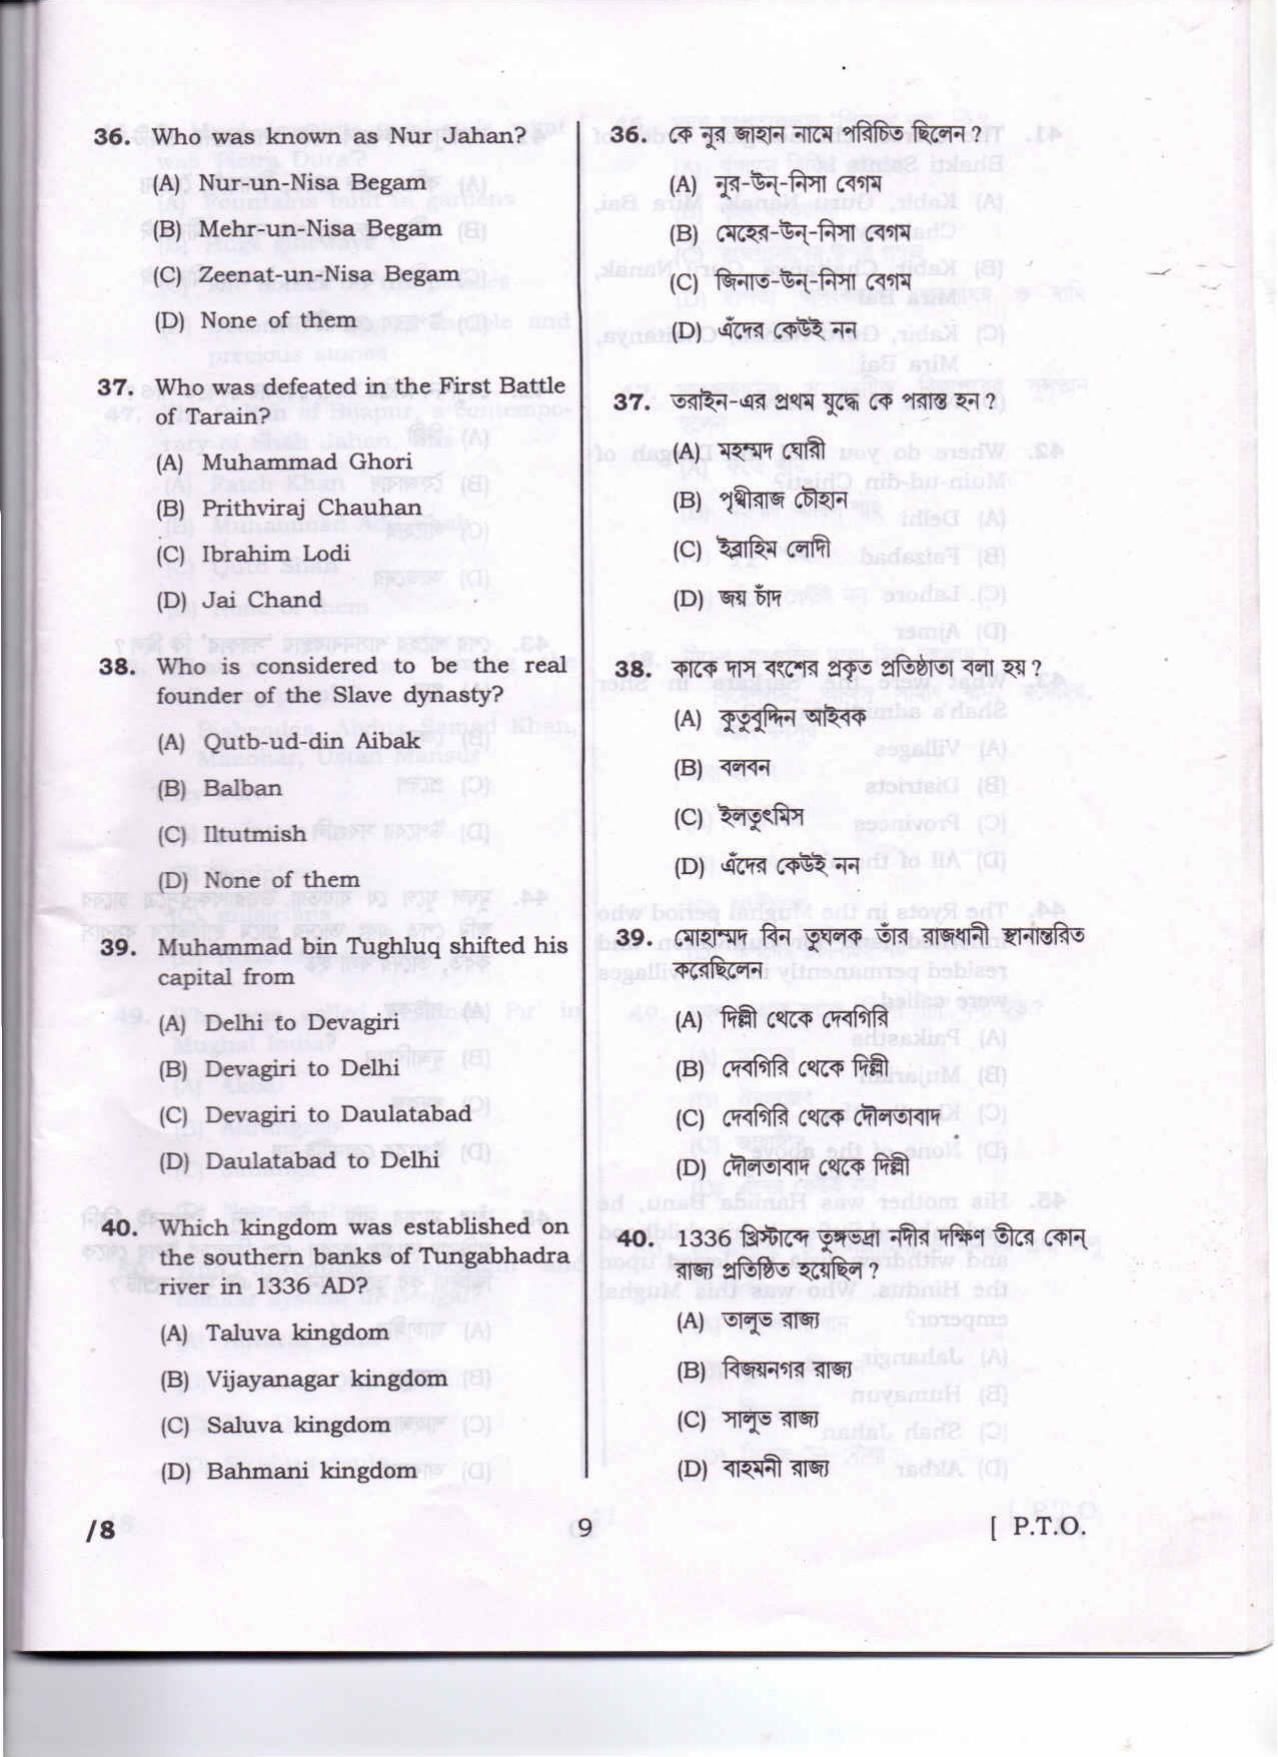 Lala Lajpat Rai University of Veterinary and Animal Sciences Papers - History - Page 17